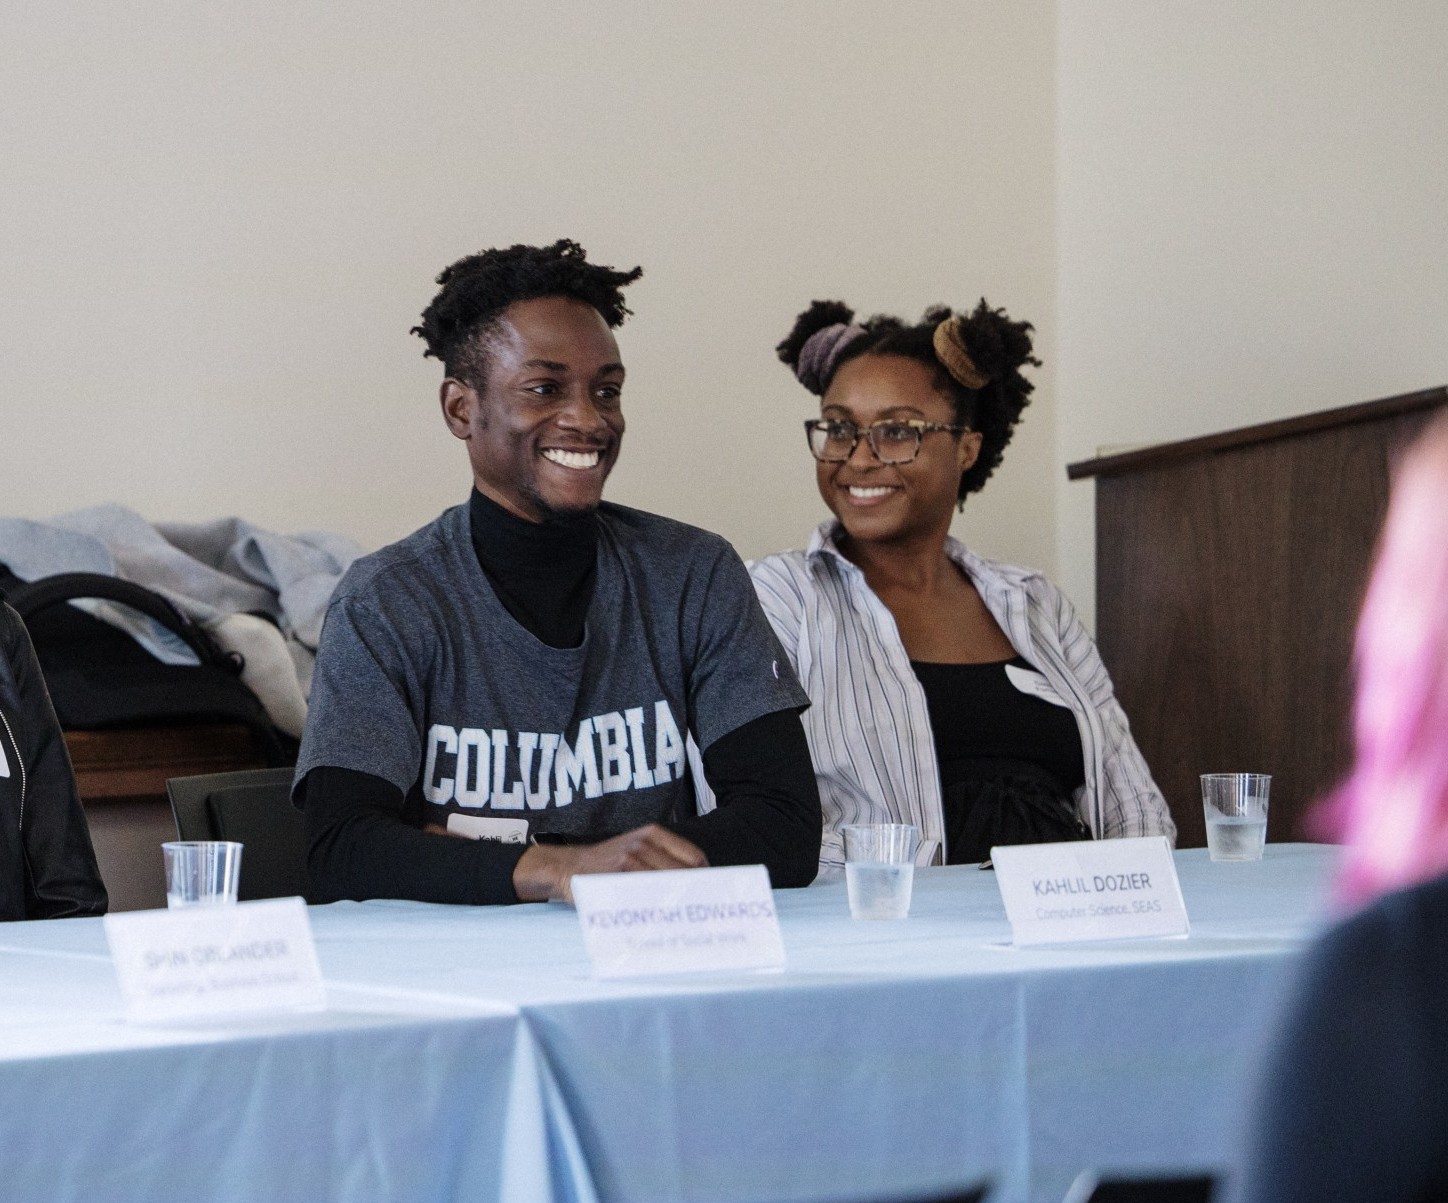 Student panelists sitting at a table smilling